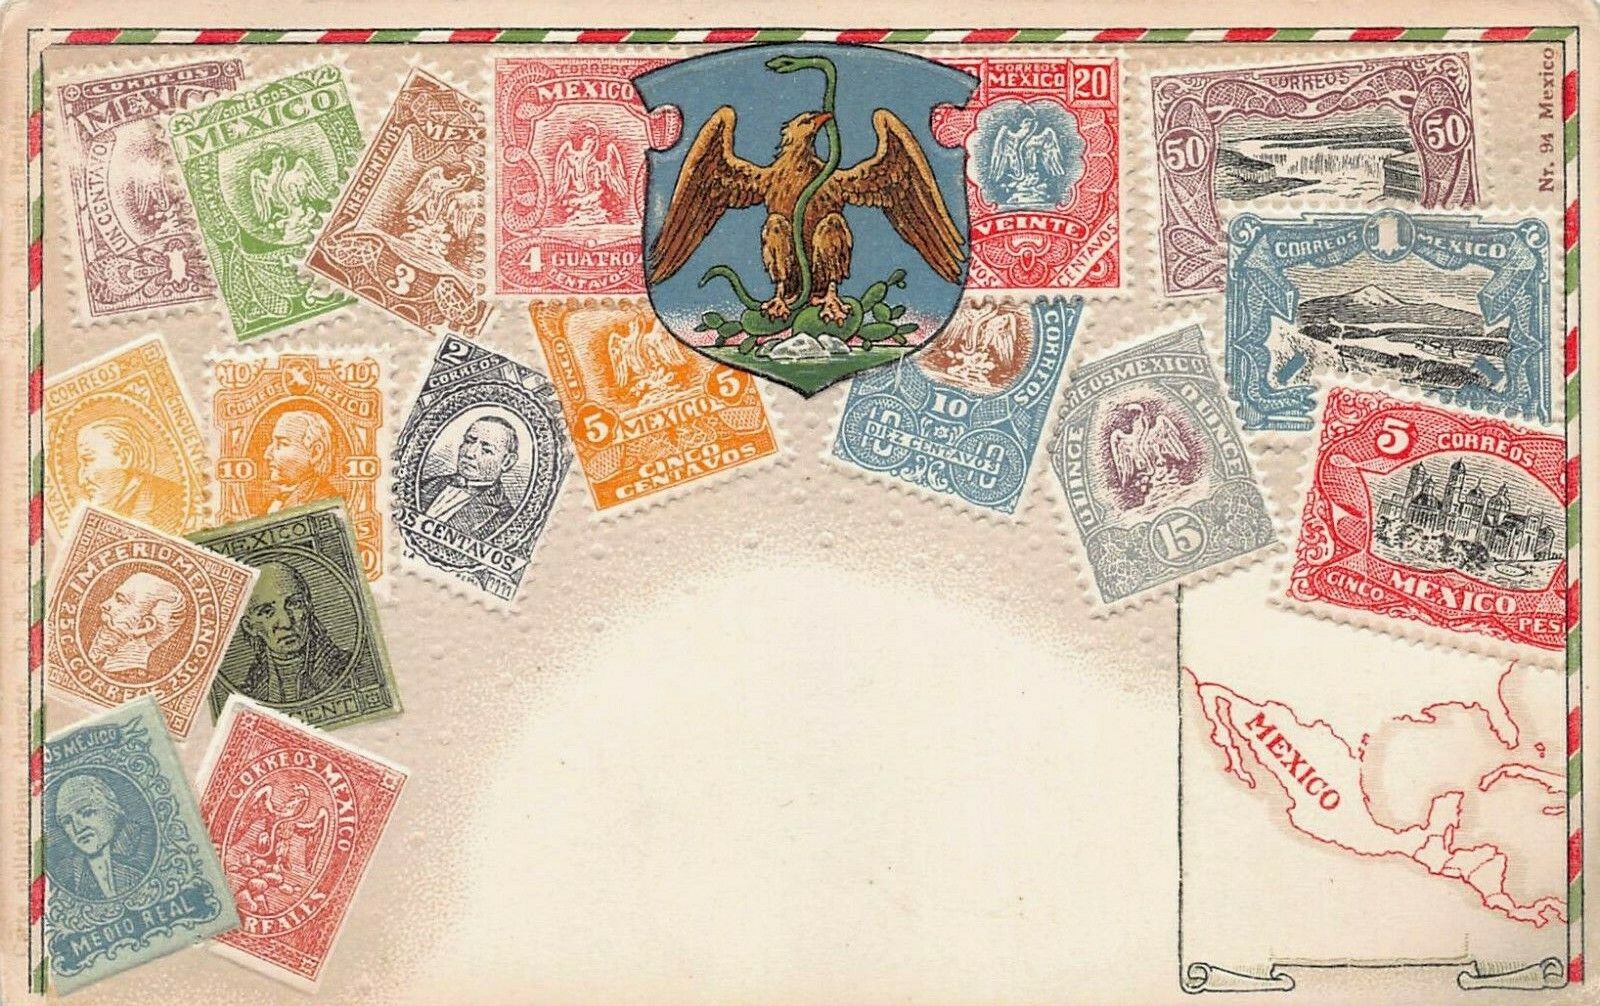 Mexico, Stamp Images on Early Embossed Postcard, Published by Ottmar Zieher